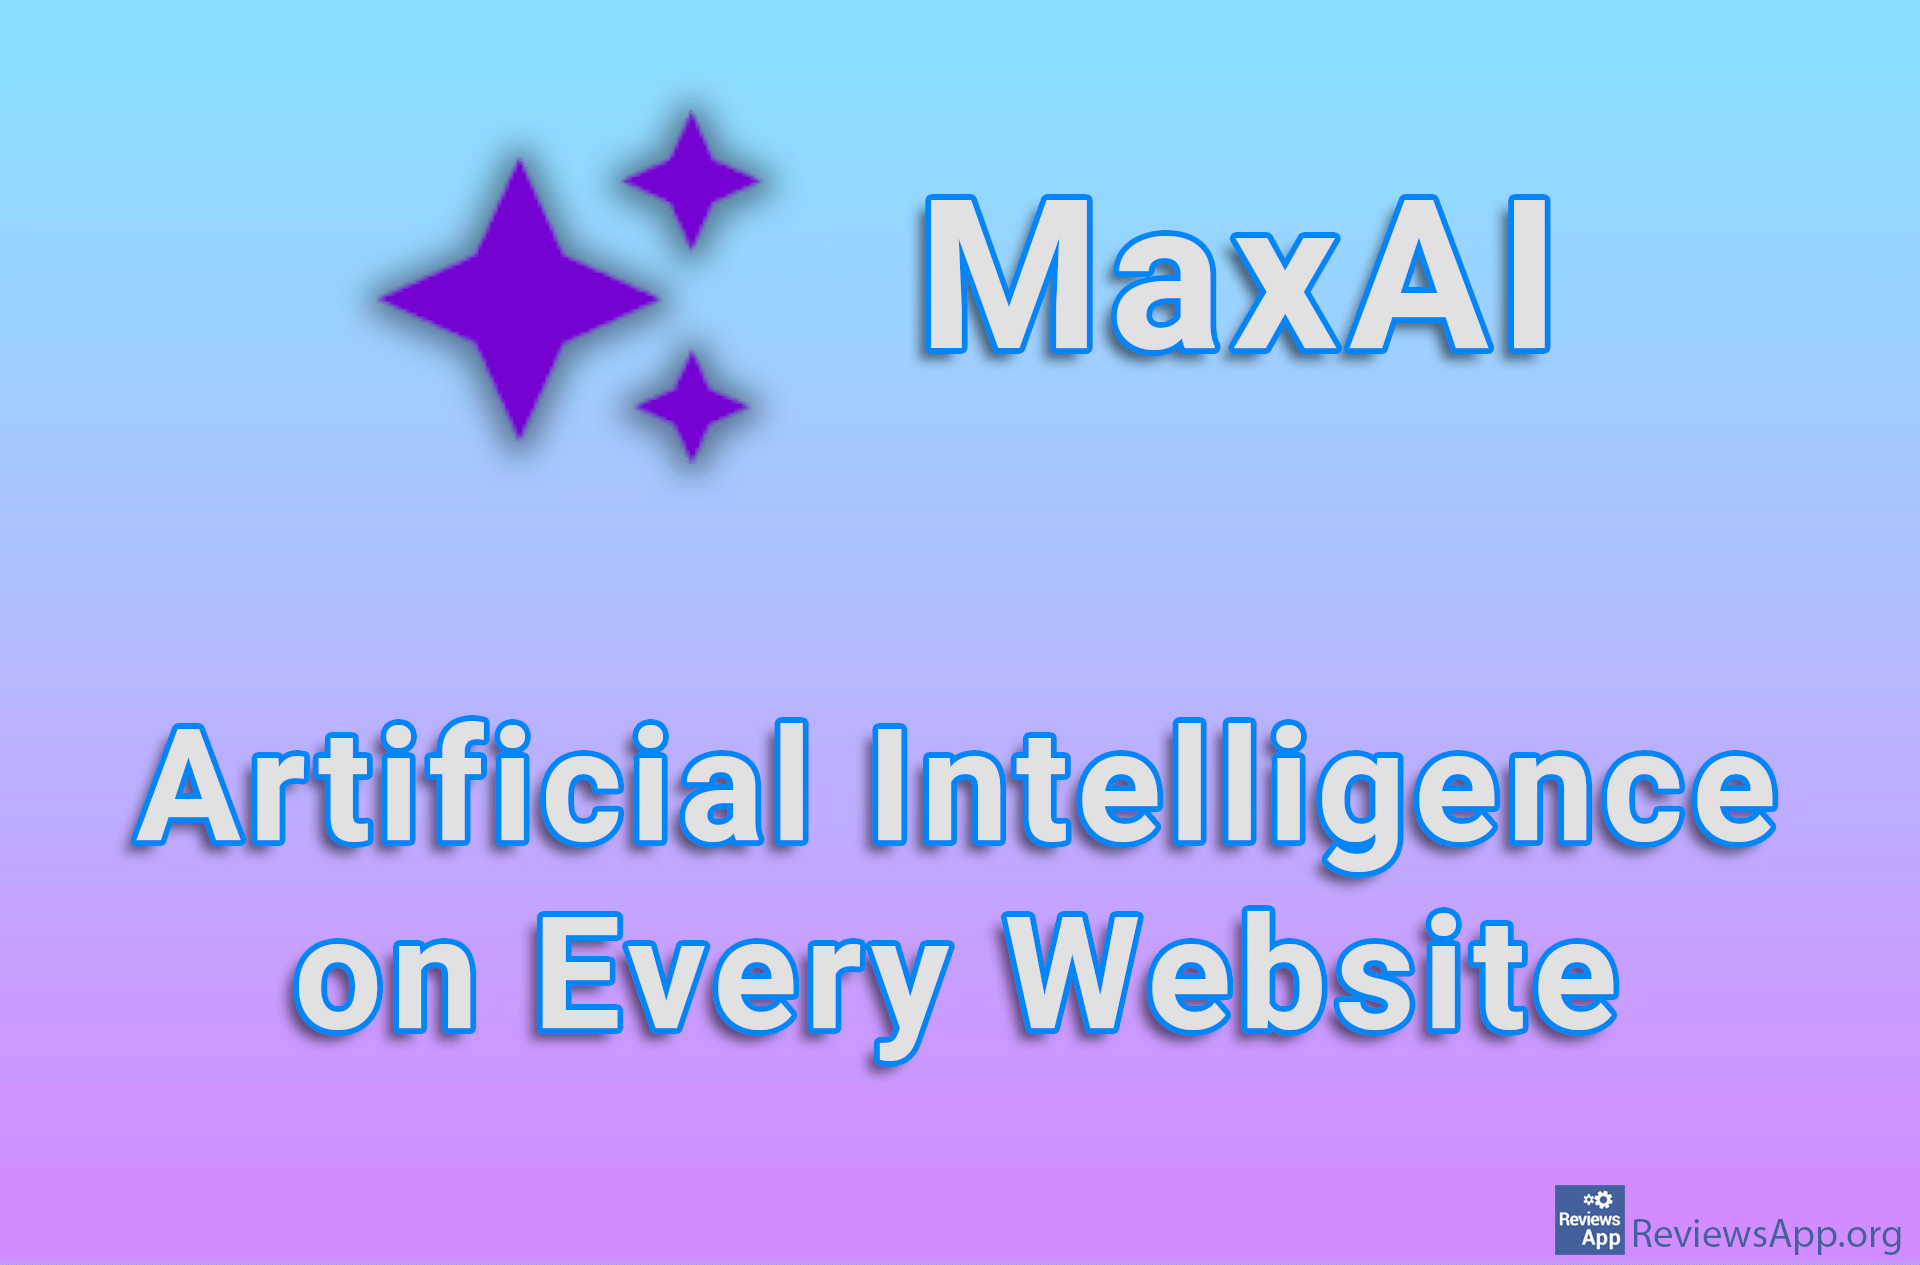 MaxAI – Artificial Intelligence on Every Website